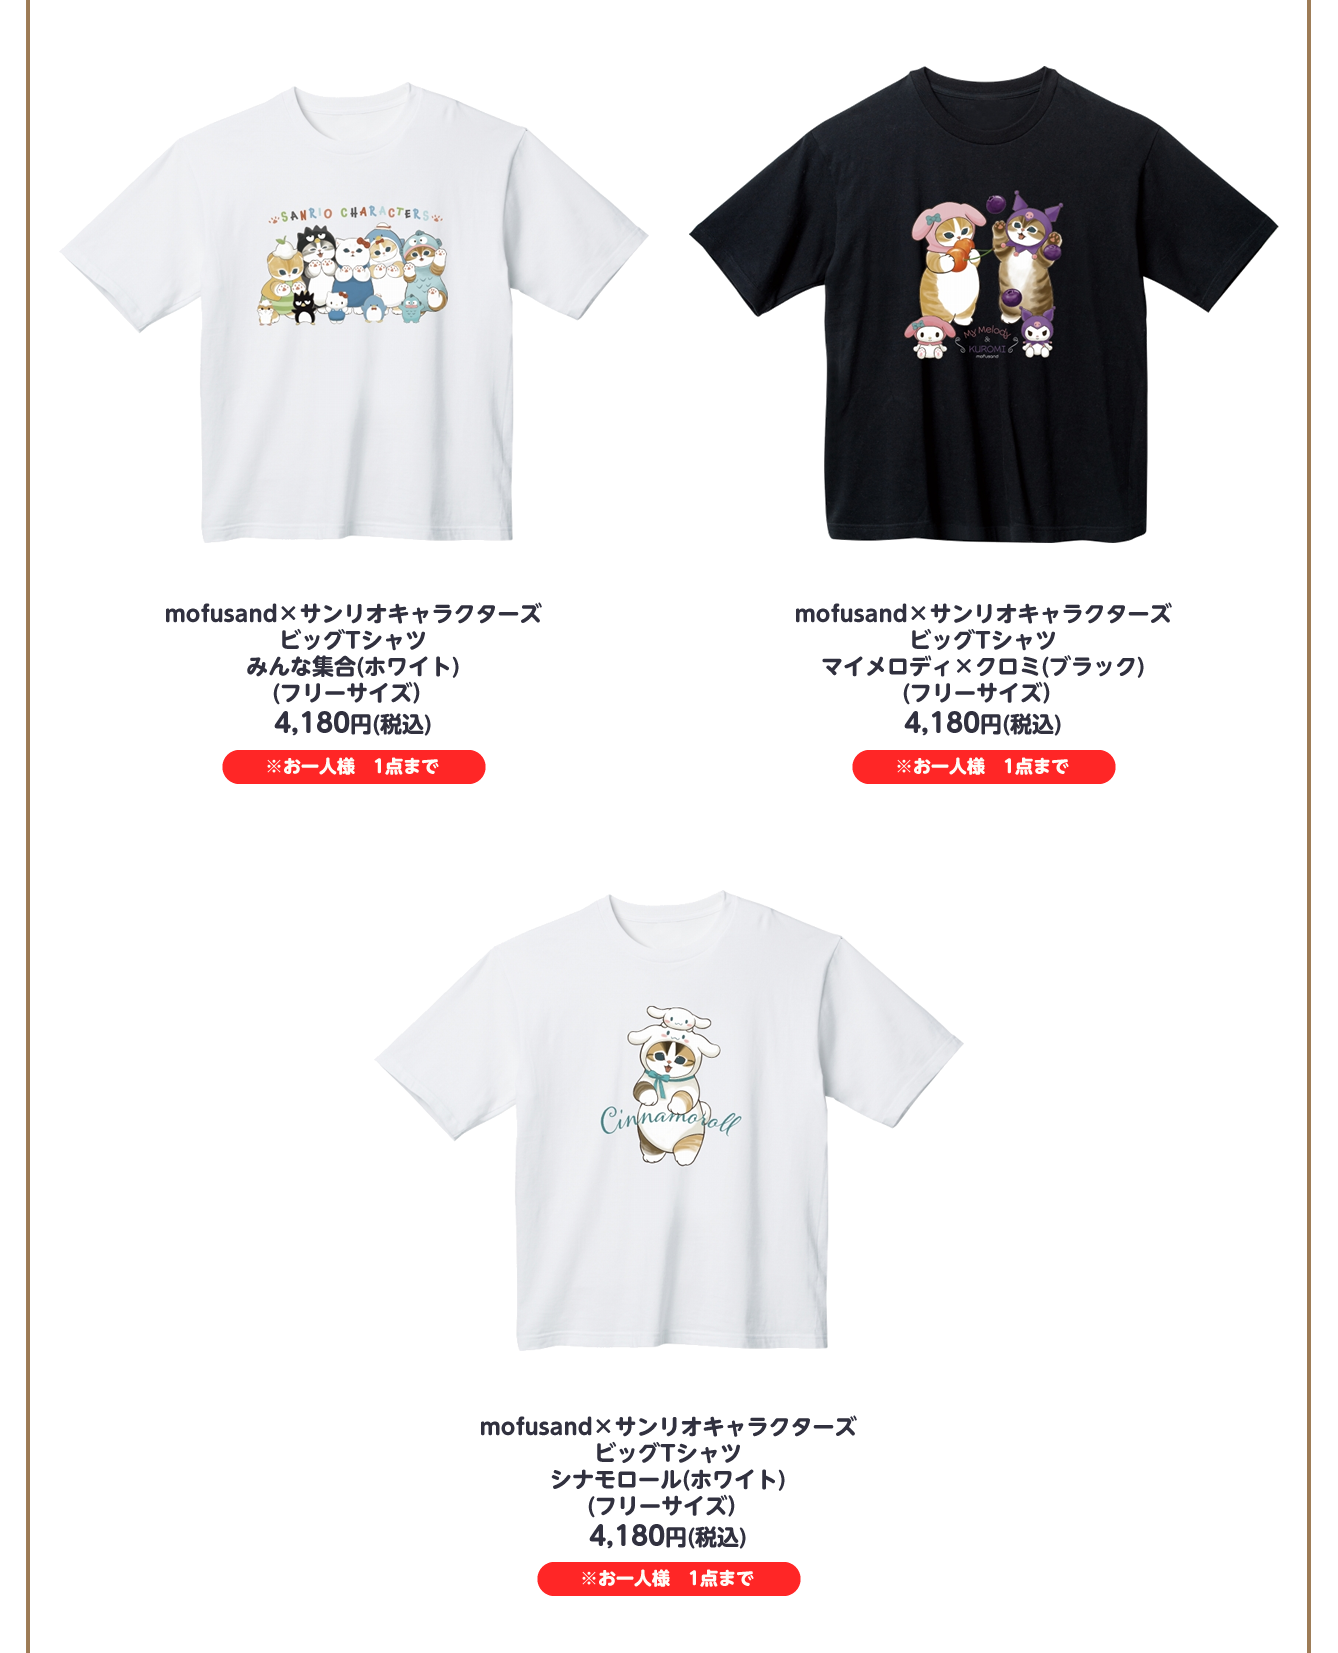 mofusand×Sanrio characters POP UP STORE